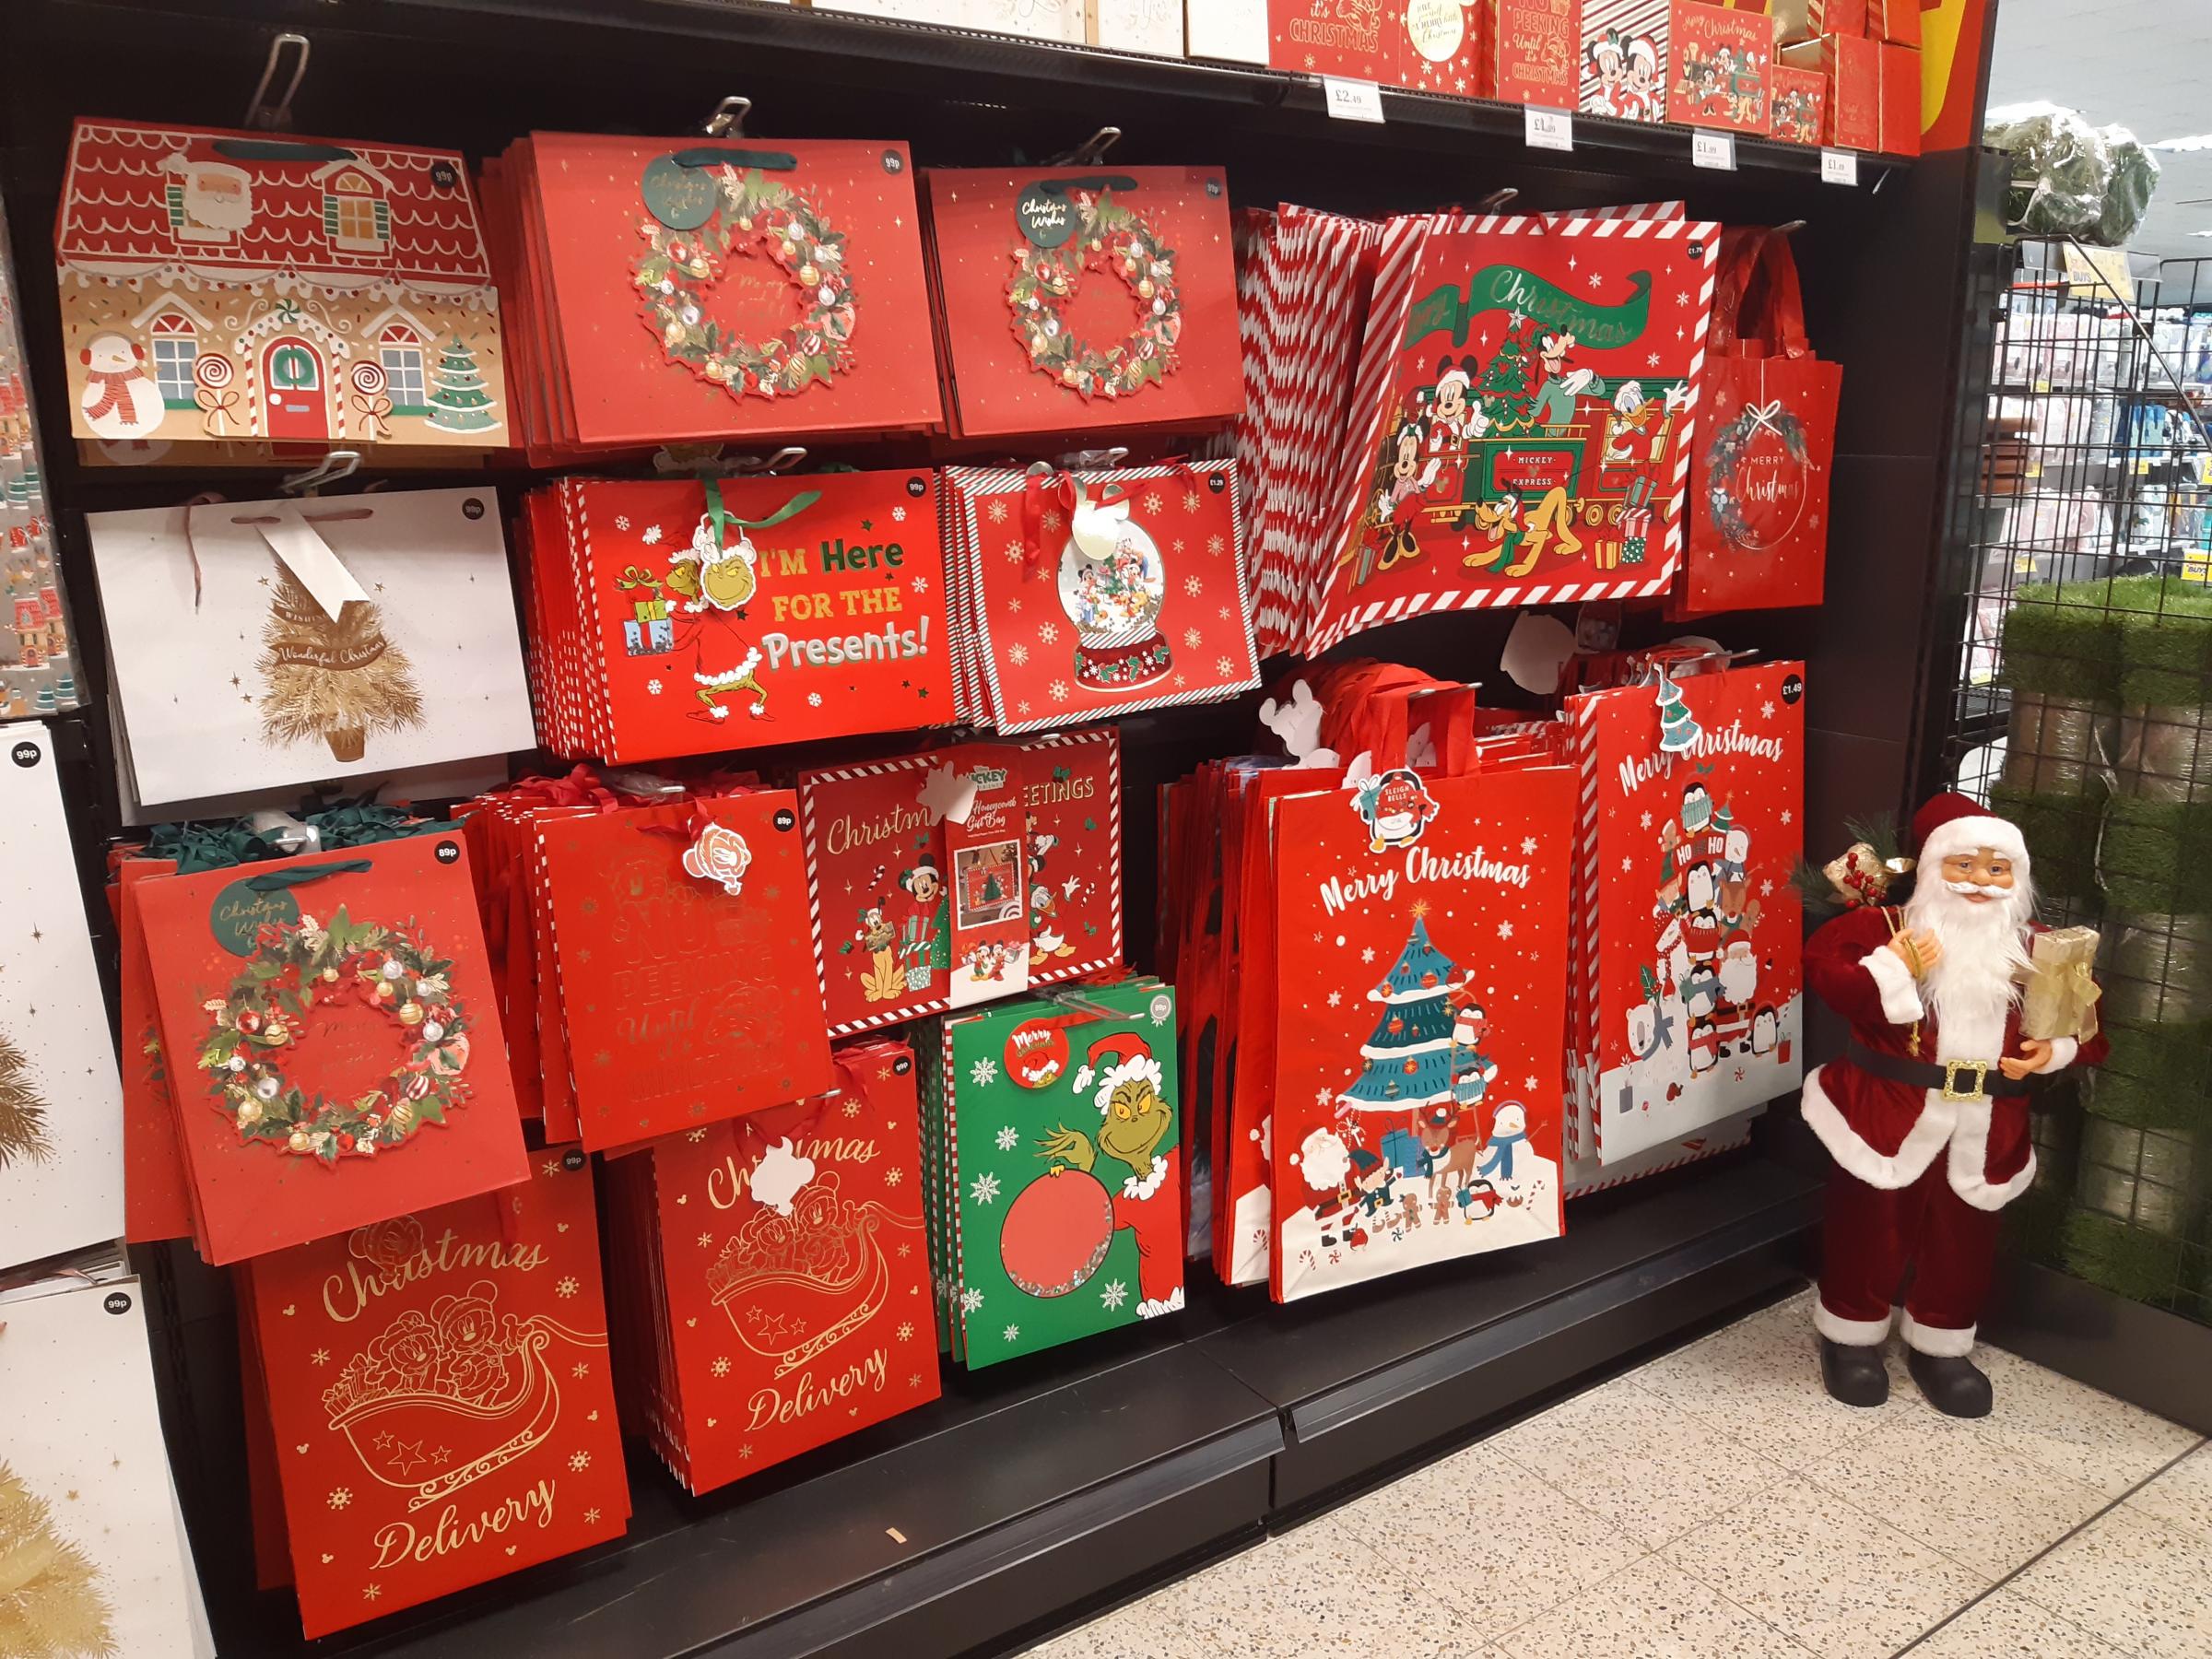 Christmas has come early to the high street, with Home Bargains in Mold getting festive.